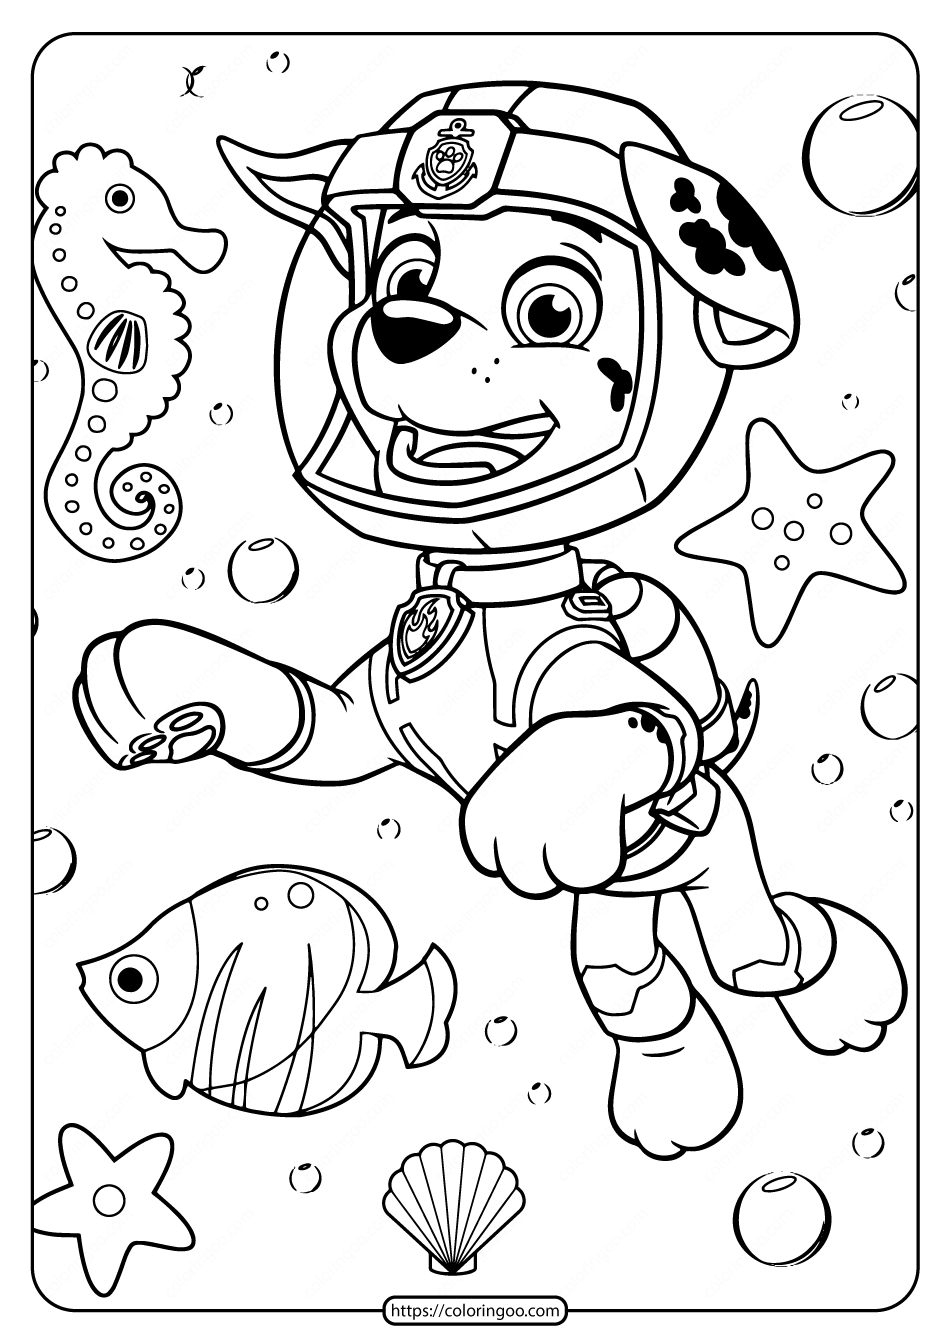 Paw Patrol Coloring Pages FREE Printable 52